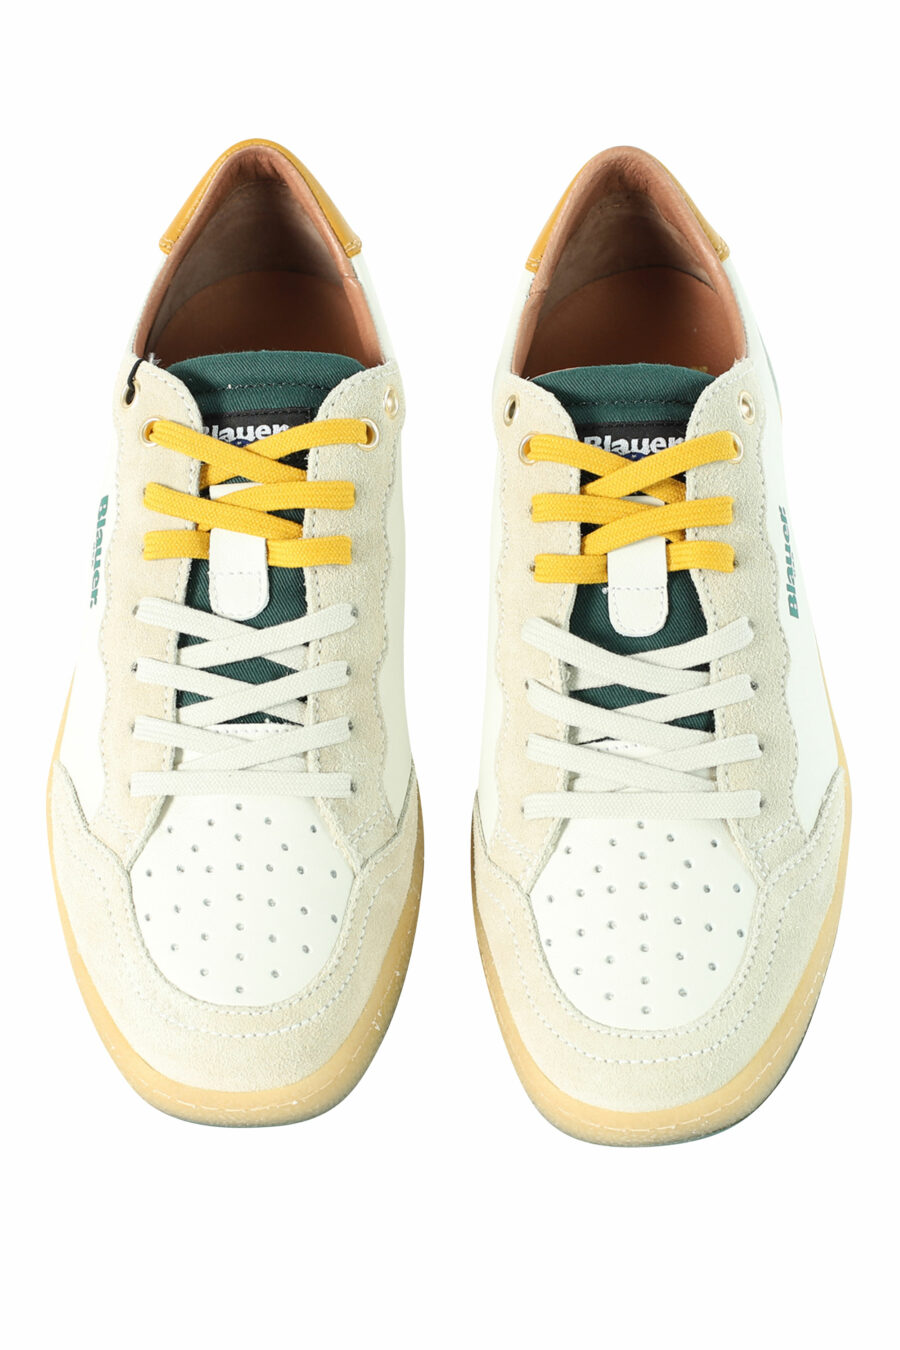 Trainers "MURRAY" white with green and yellow details - Photos 3039